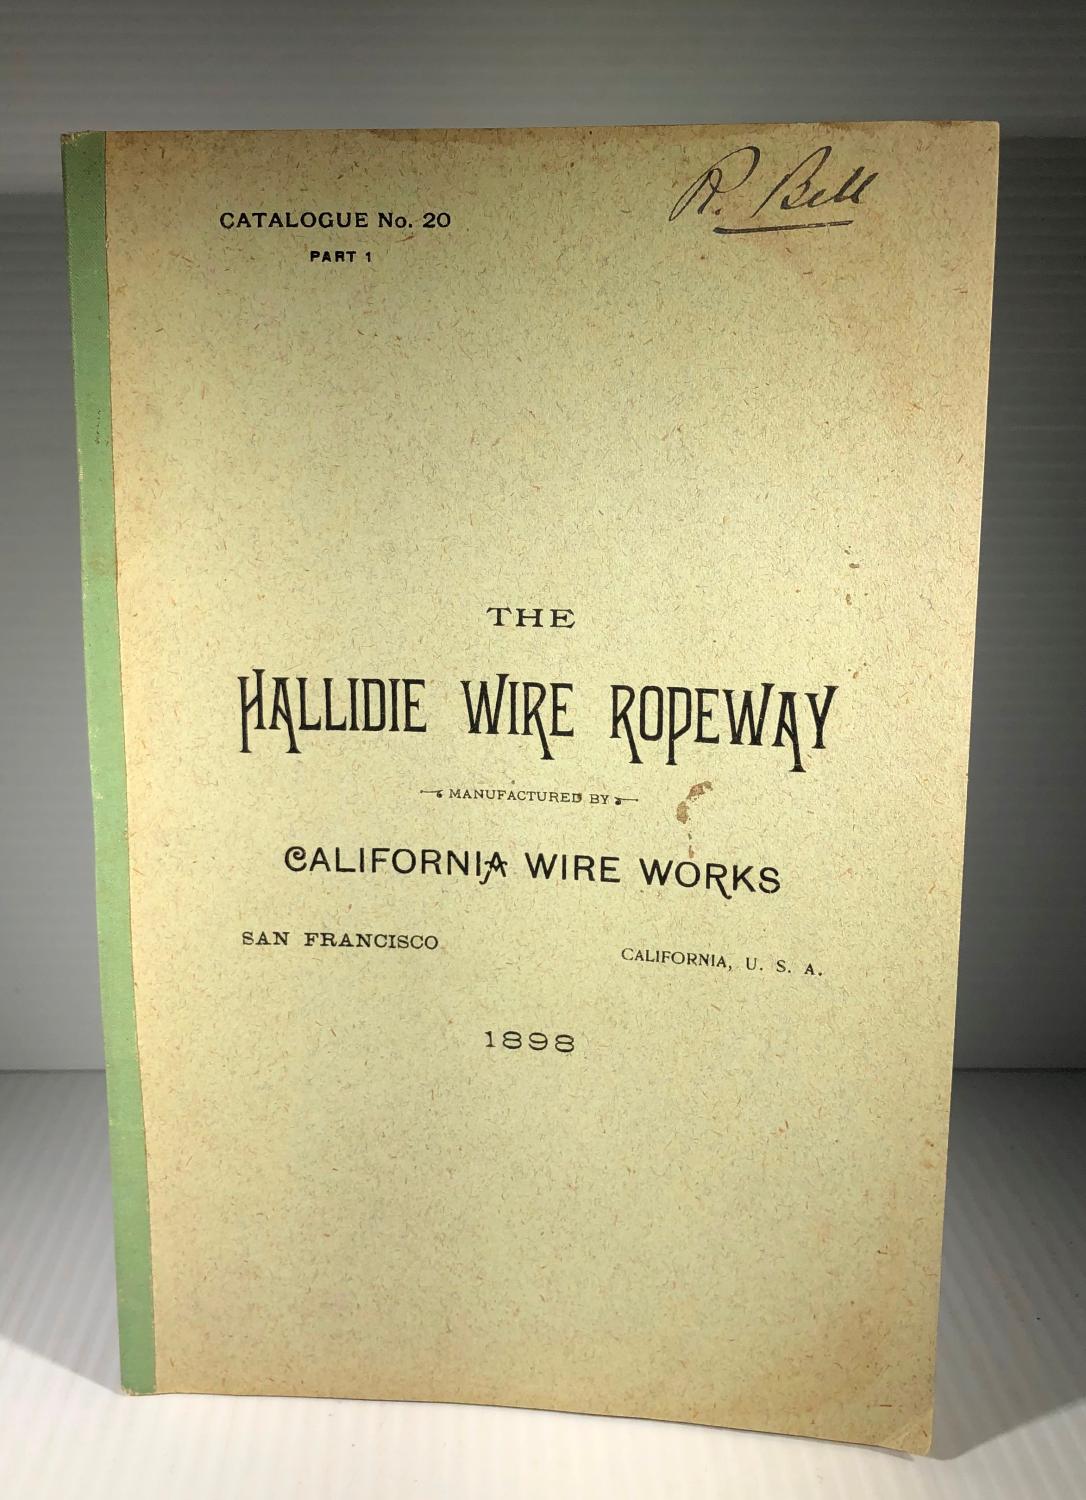 The Hallidie Endless Wire Ropeway Manufactured by California Wire Works ...